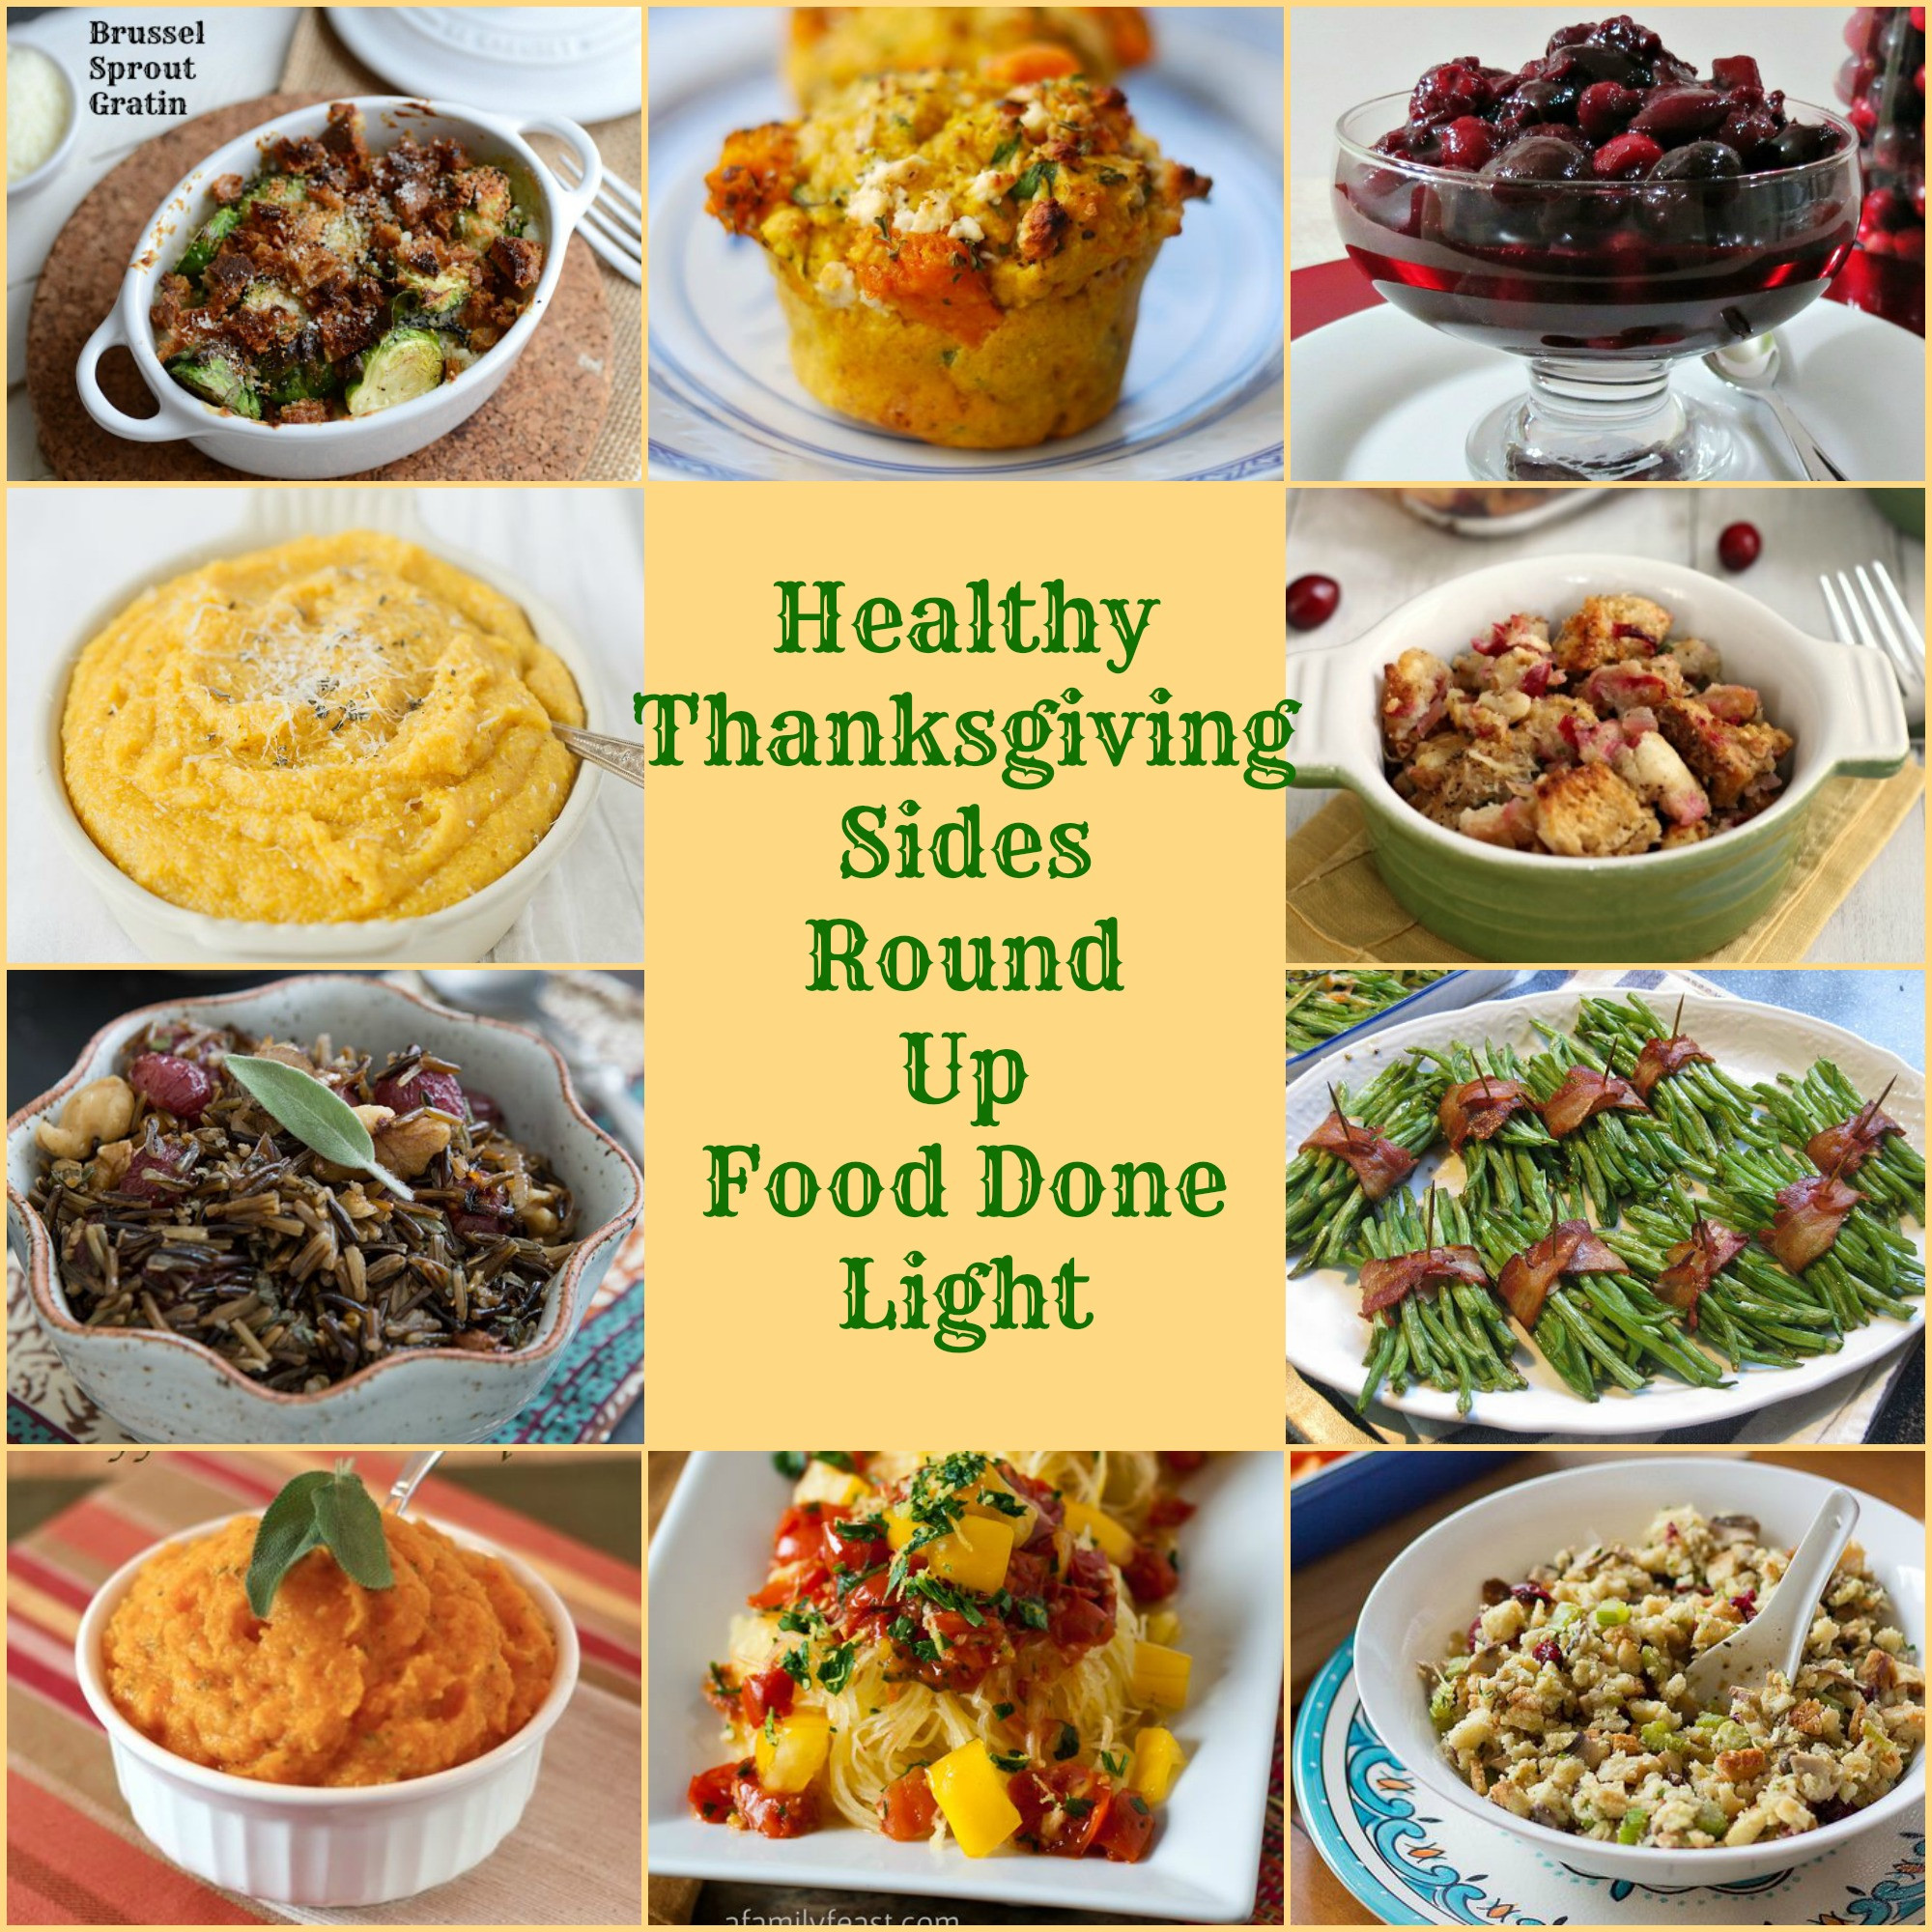 Healthy Side Dishes For Thanksgiving
 Healthy Thanksgiving Sides Recipe Round Up Food Done Light